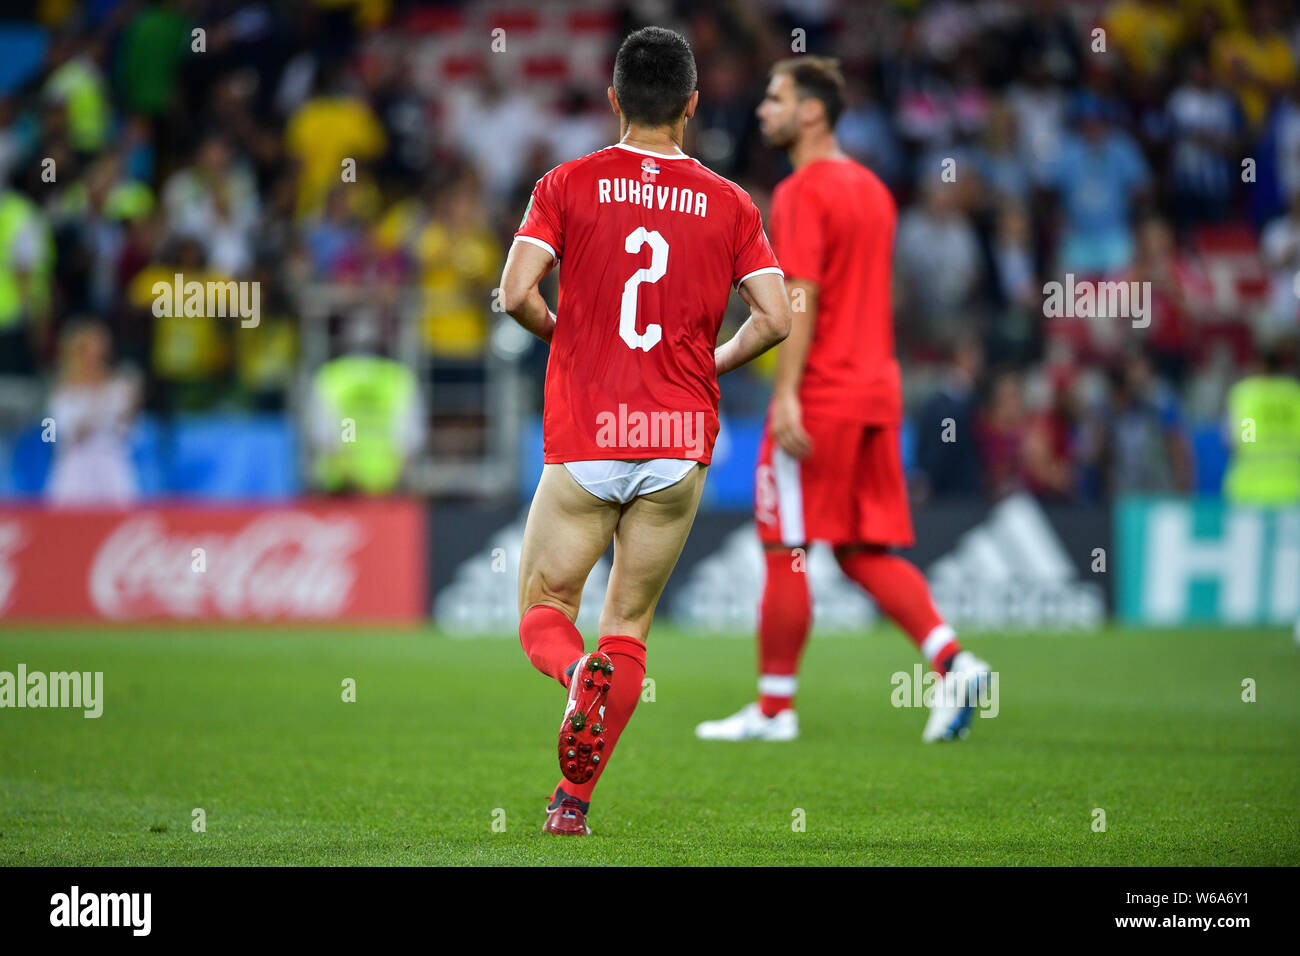 Antonio Rukavina of Serbia who lost his shorts jogs towards the sideline after their Group E match against Brazil during the FIFA World Cup 2018 in Mo Stock Photo